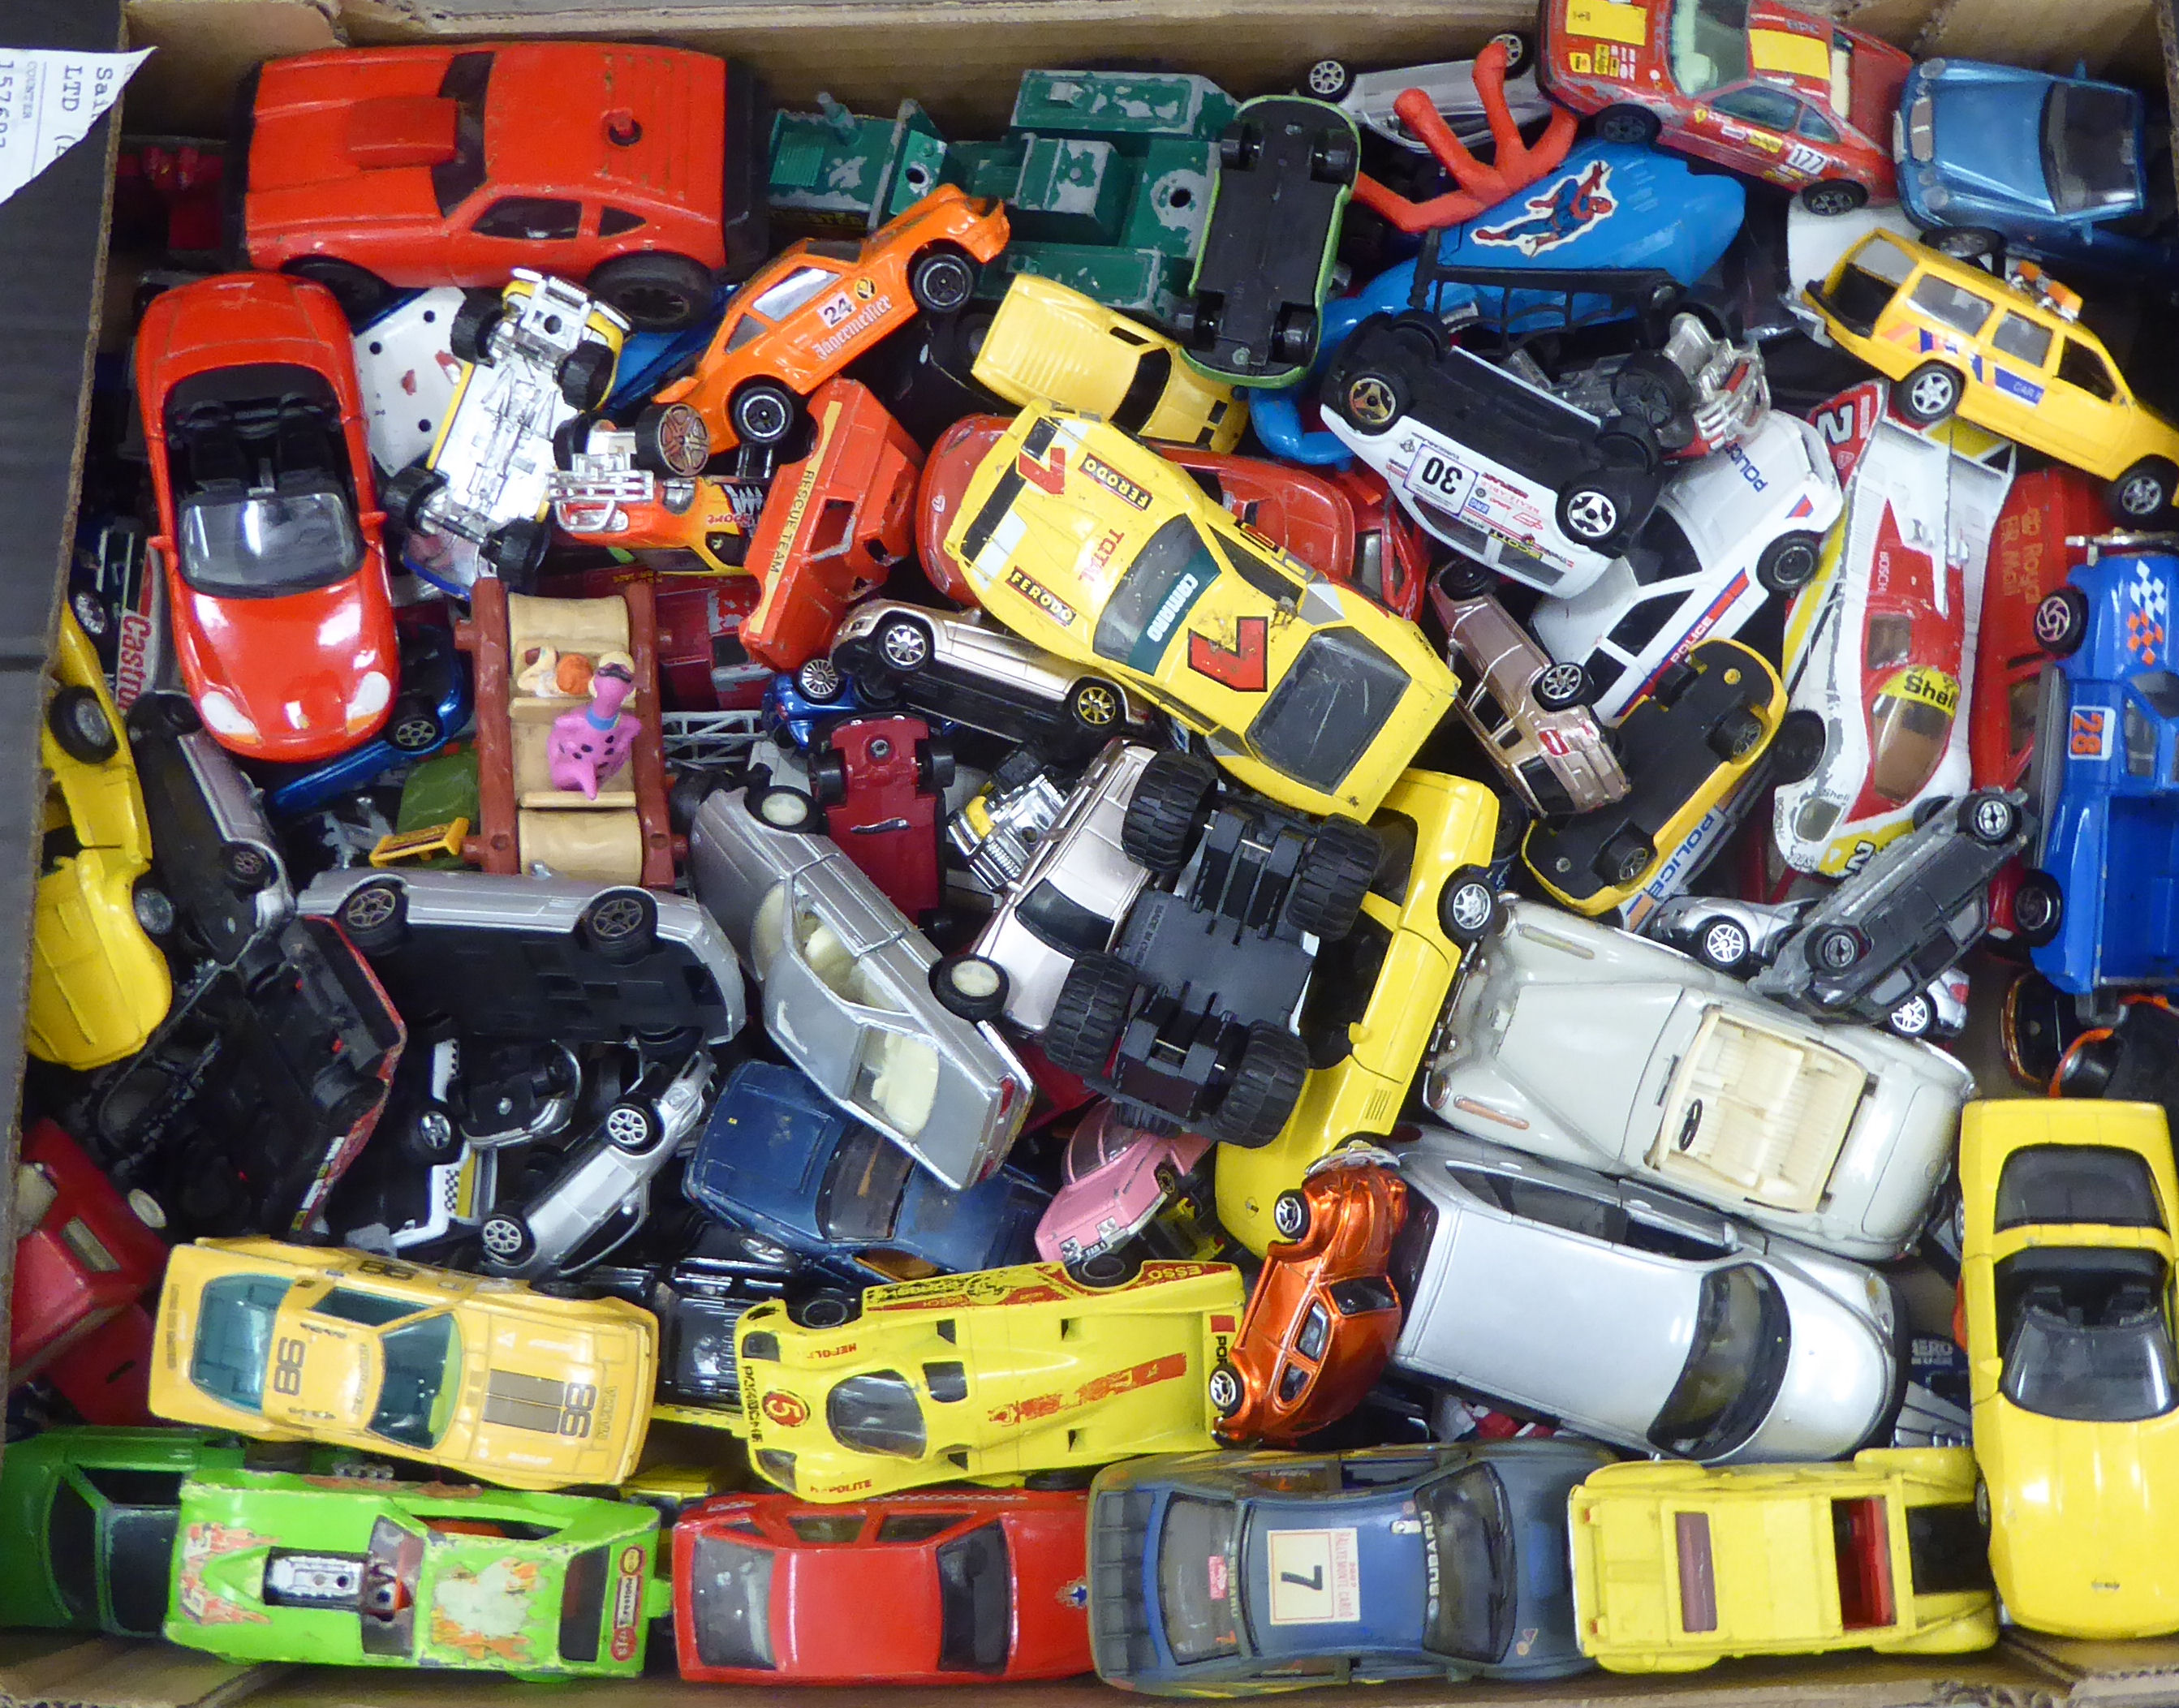 Uncollated diecast model vehicles, recovery, emergency services, sports cars and convertibles: to